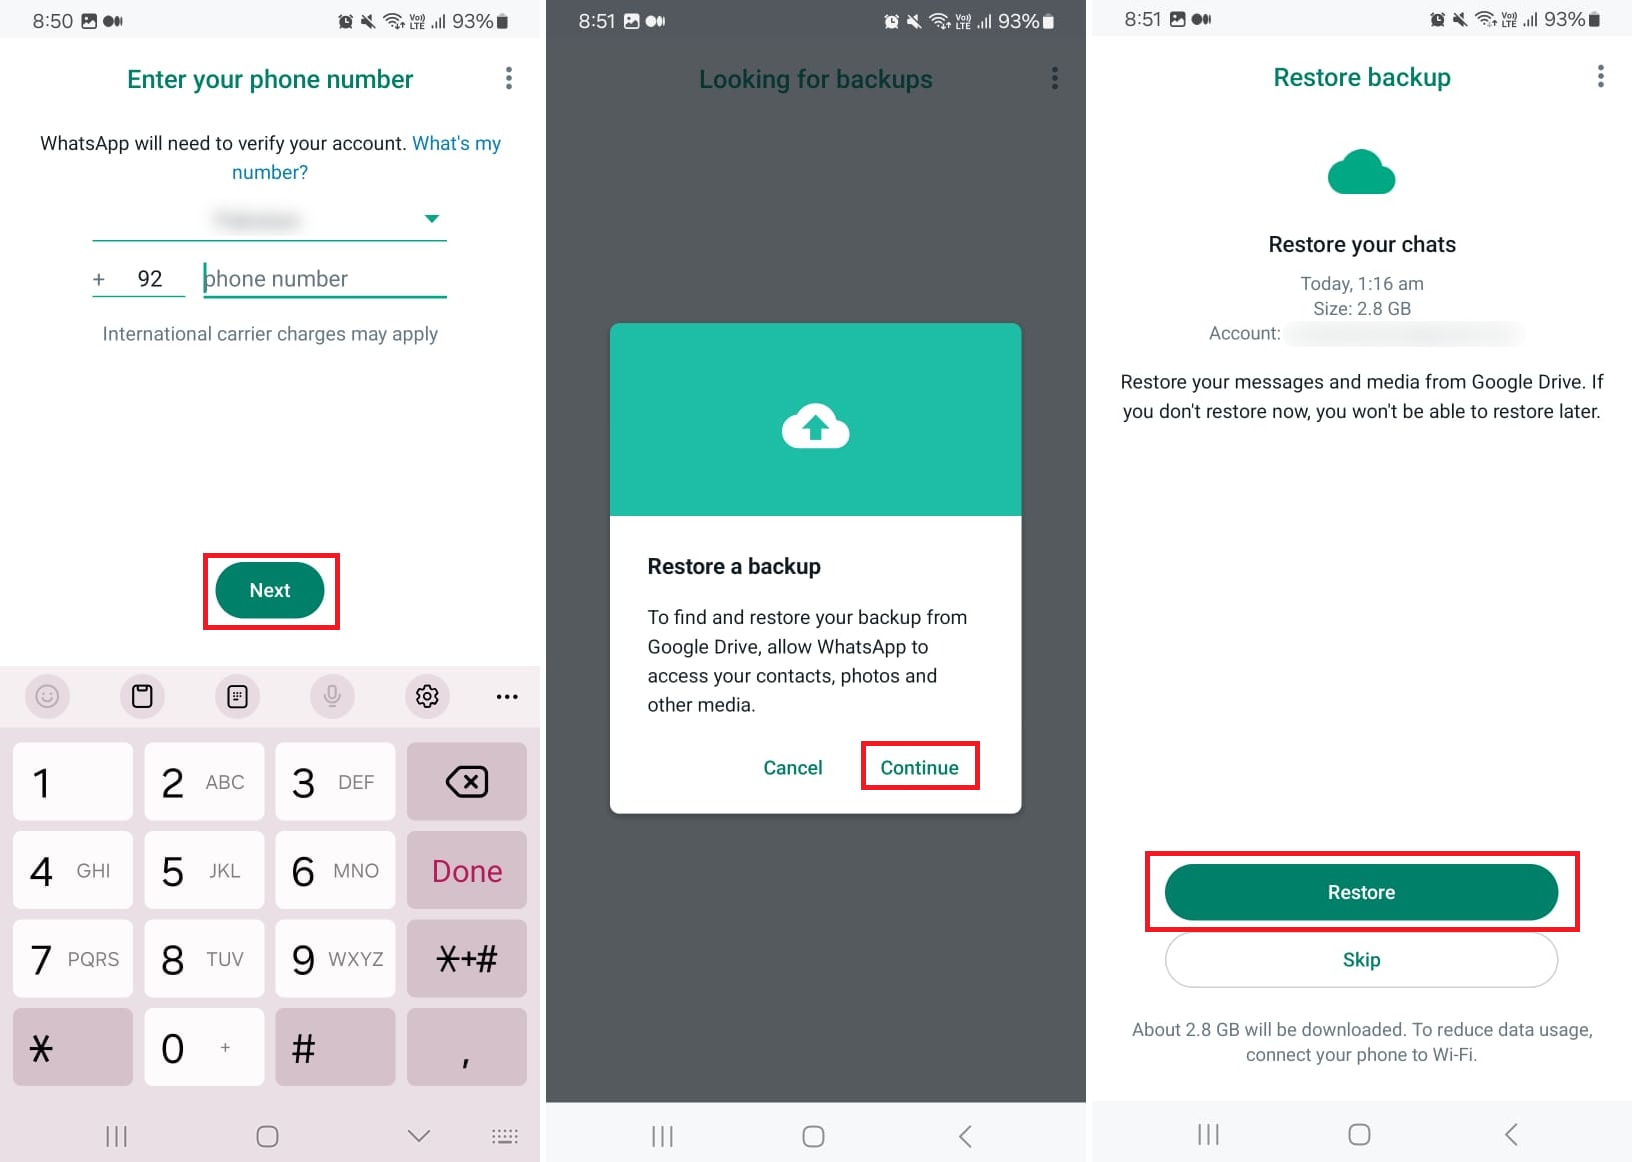 Restore backup on the new phone to transfer WhatsApp from Android to Android.